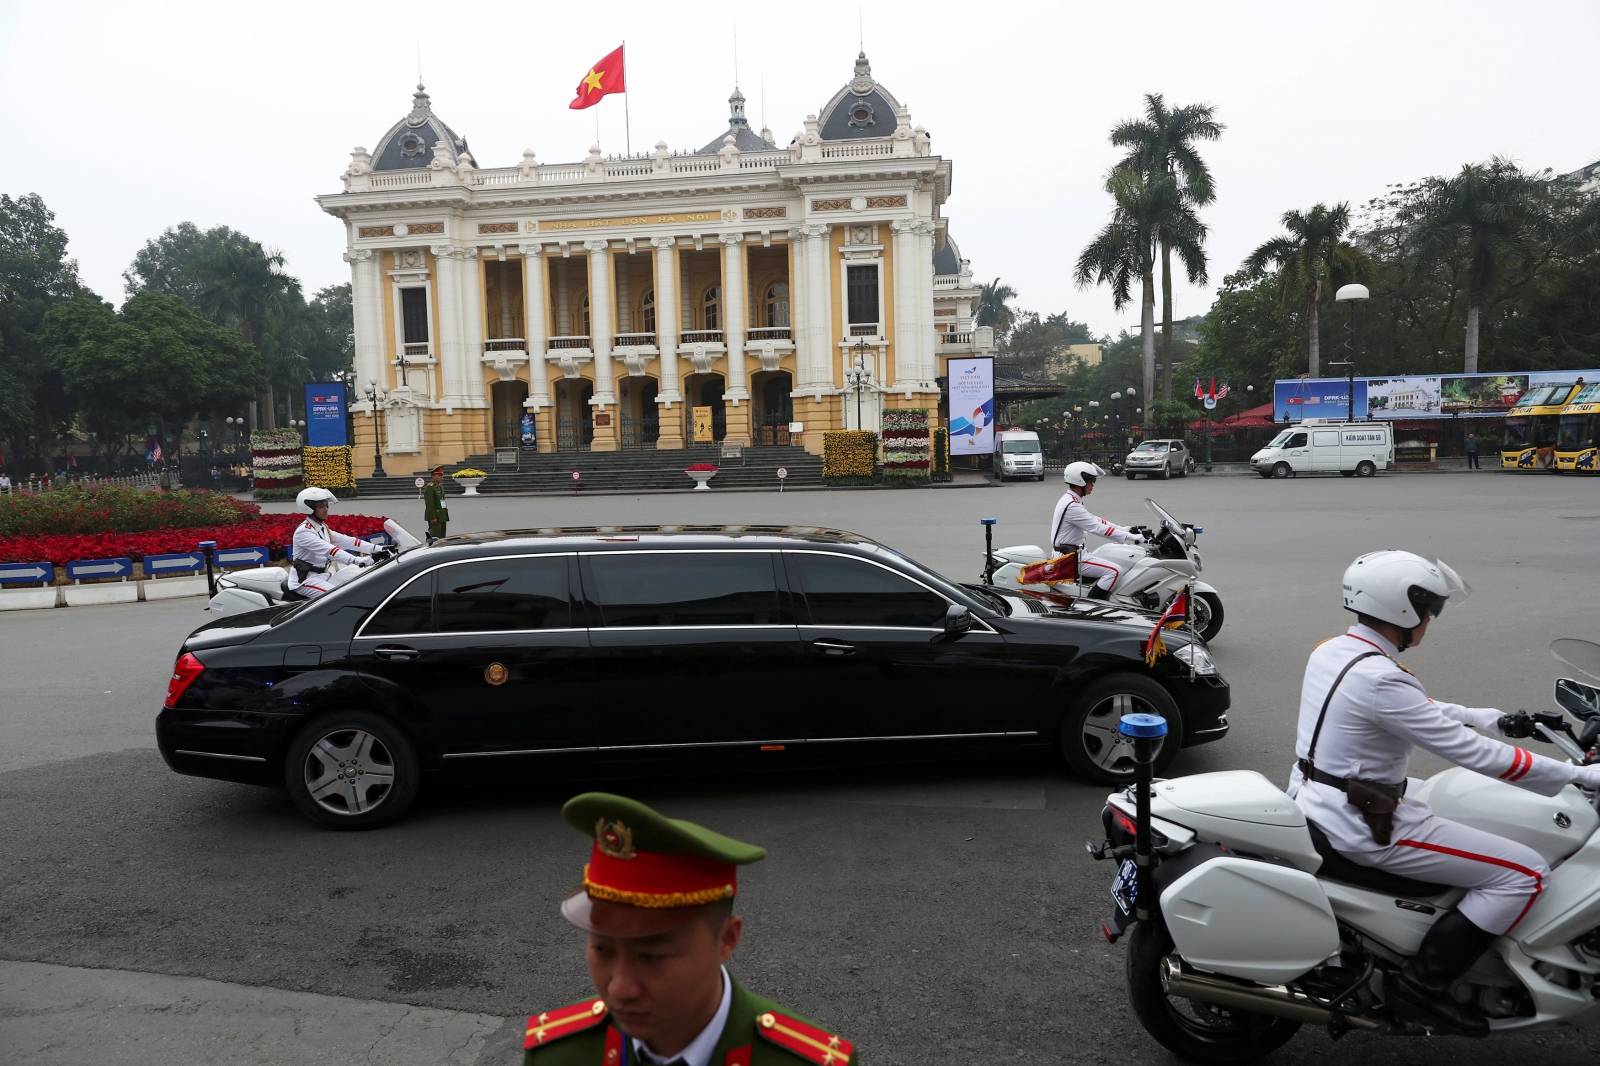 The motorcade transporting North Korean leader Kim Jong Un passes the Opera House after leaving the Metropole Hotel after his meeting with U.S. President Donald Trump for the second North Korea-U.S. summit in Hanoi